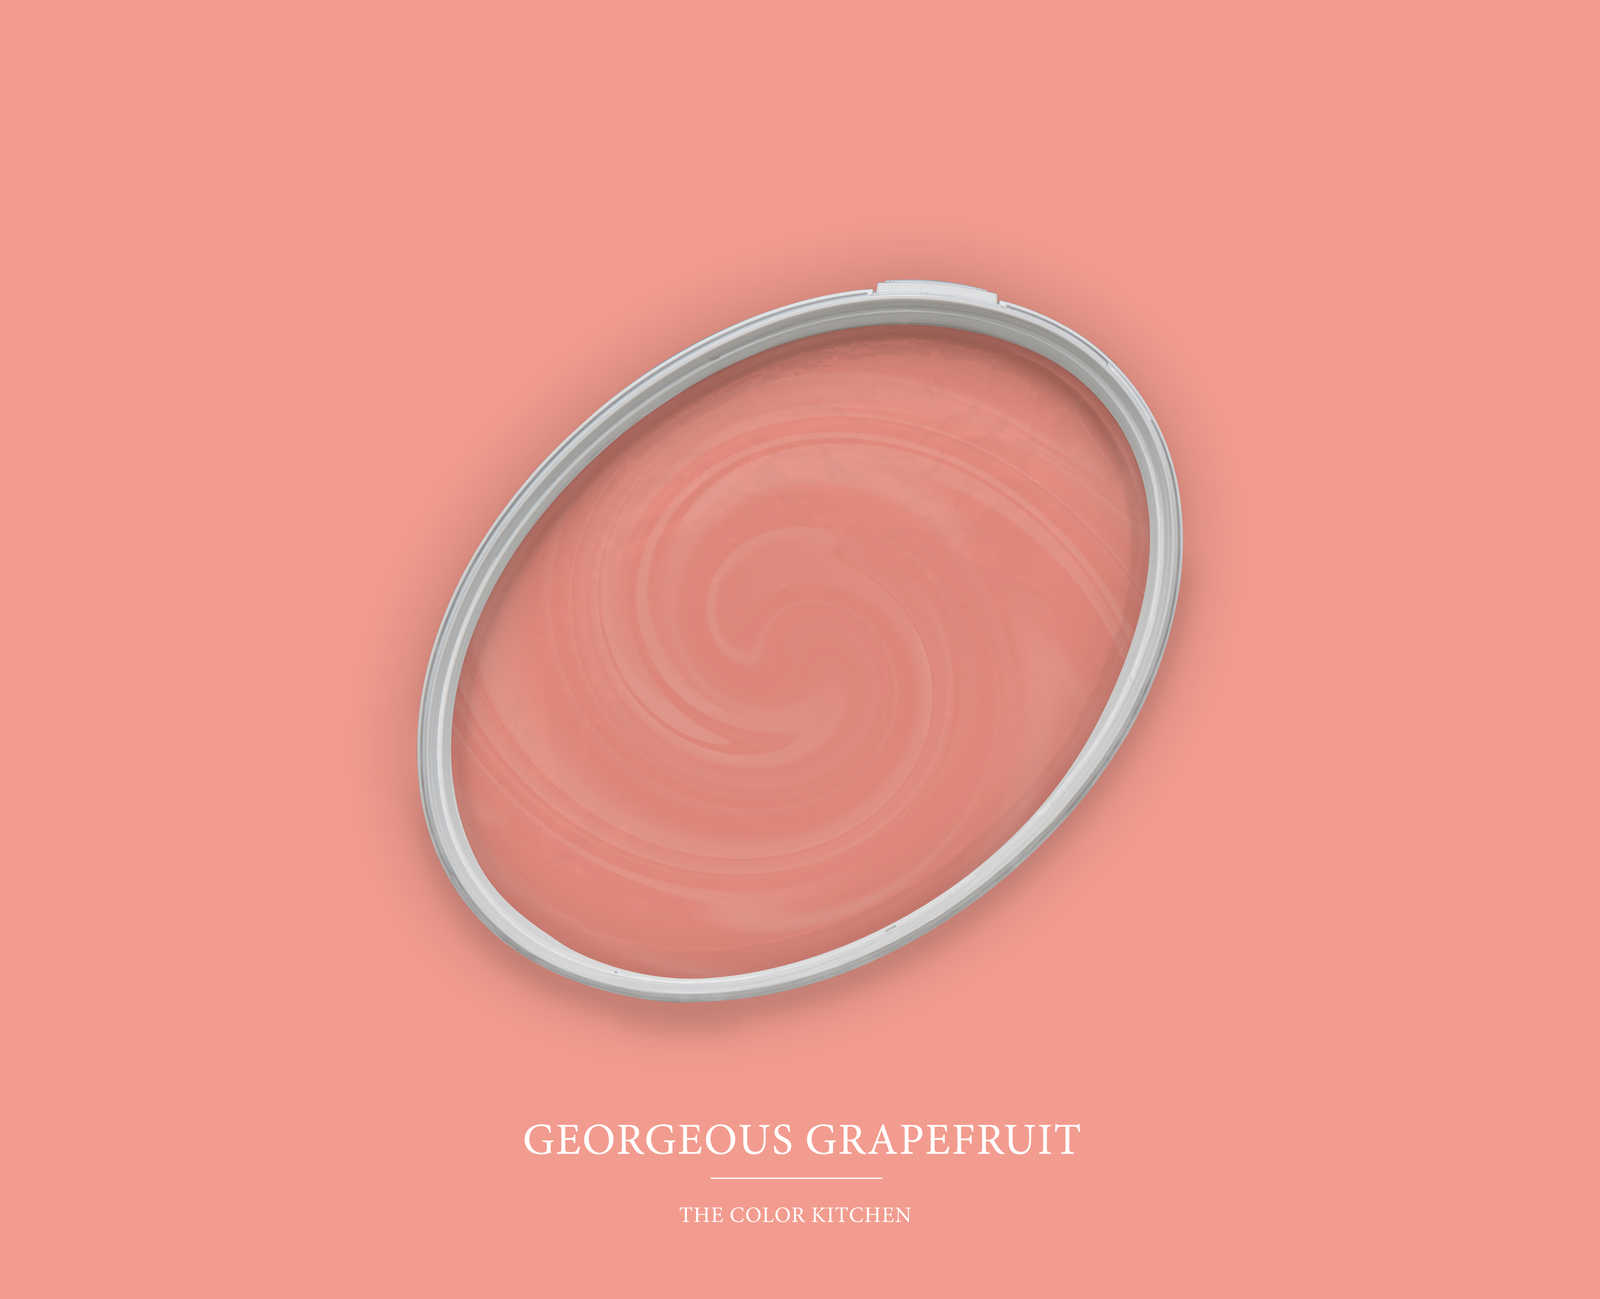         Wall Paint TCK7004 »Georgeous Grapefruit« in bright coral – 2.5 litre
    